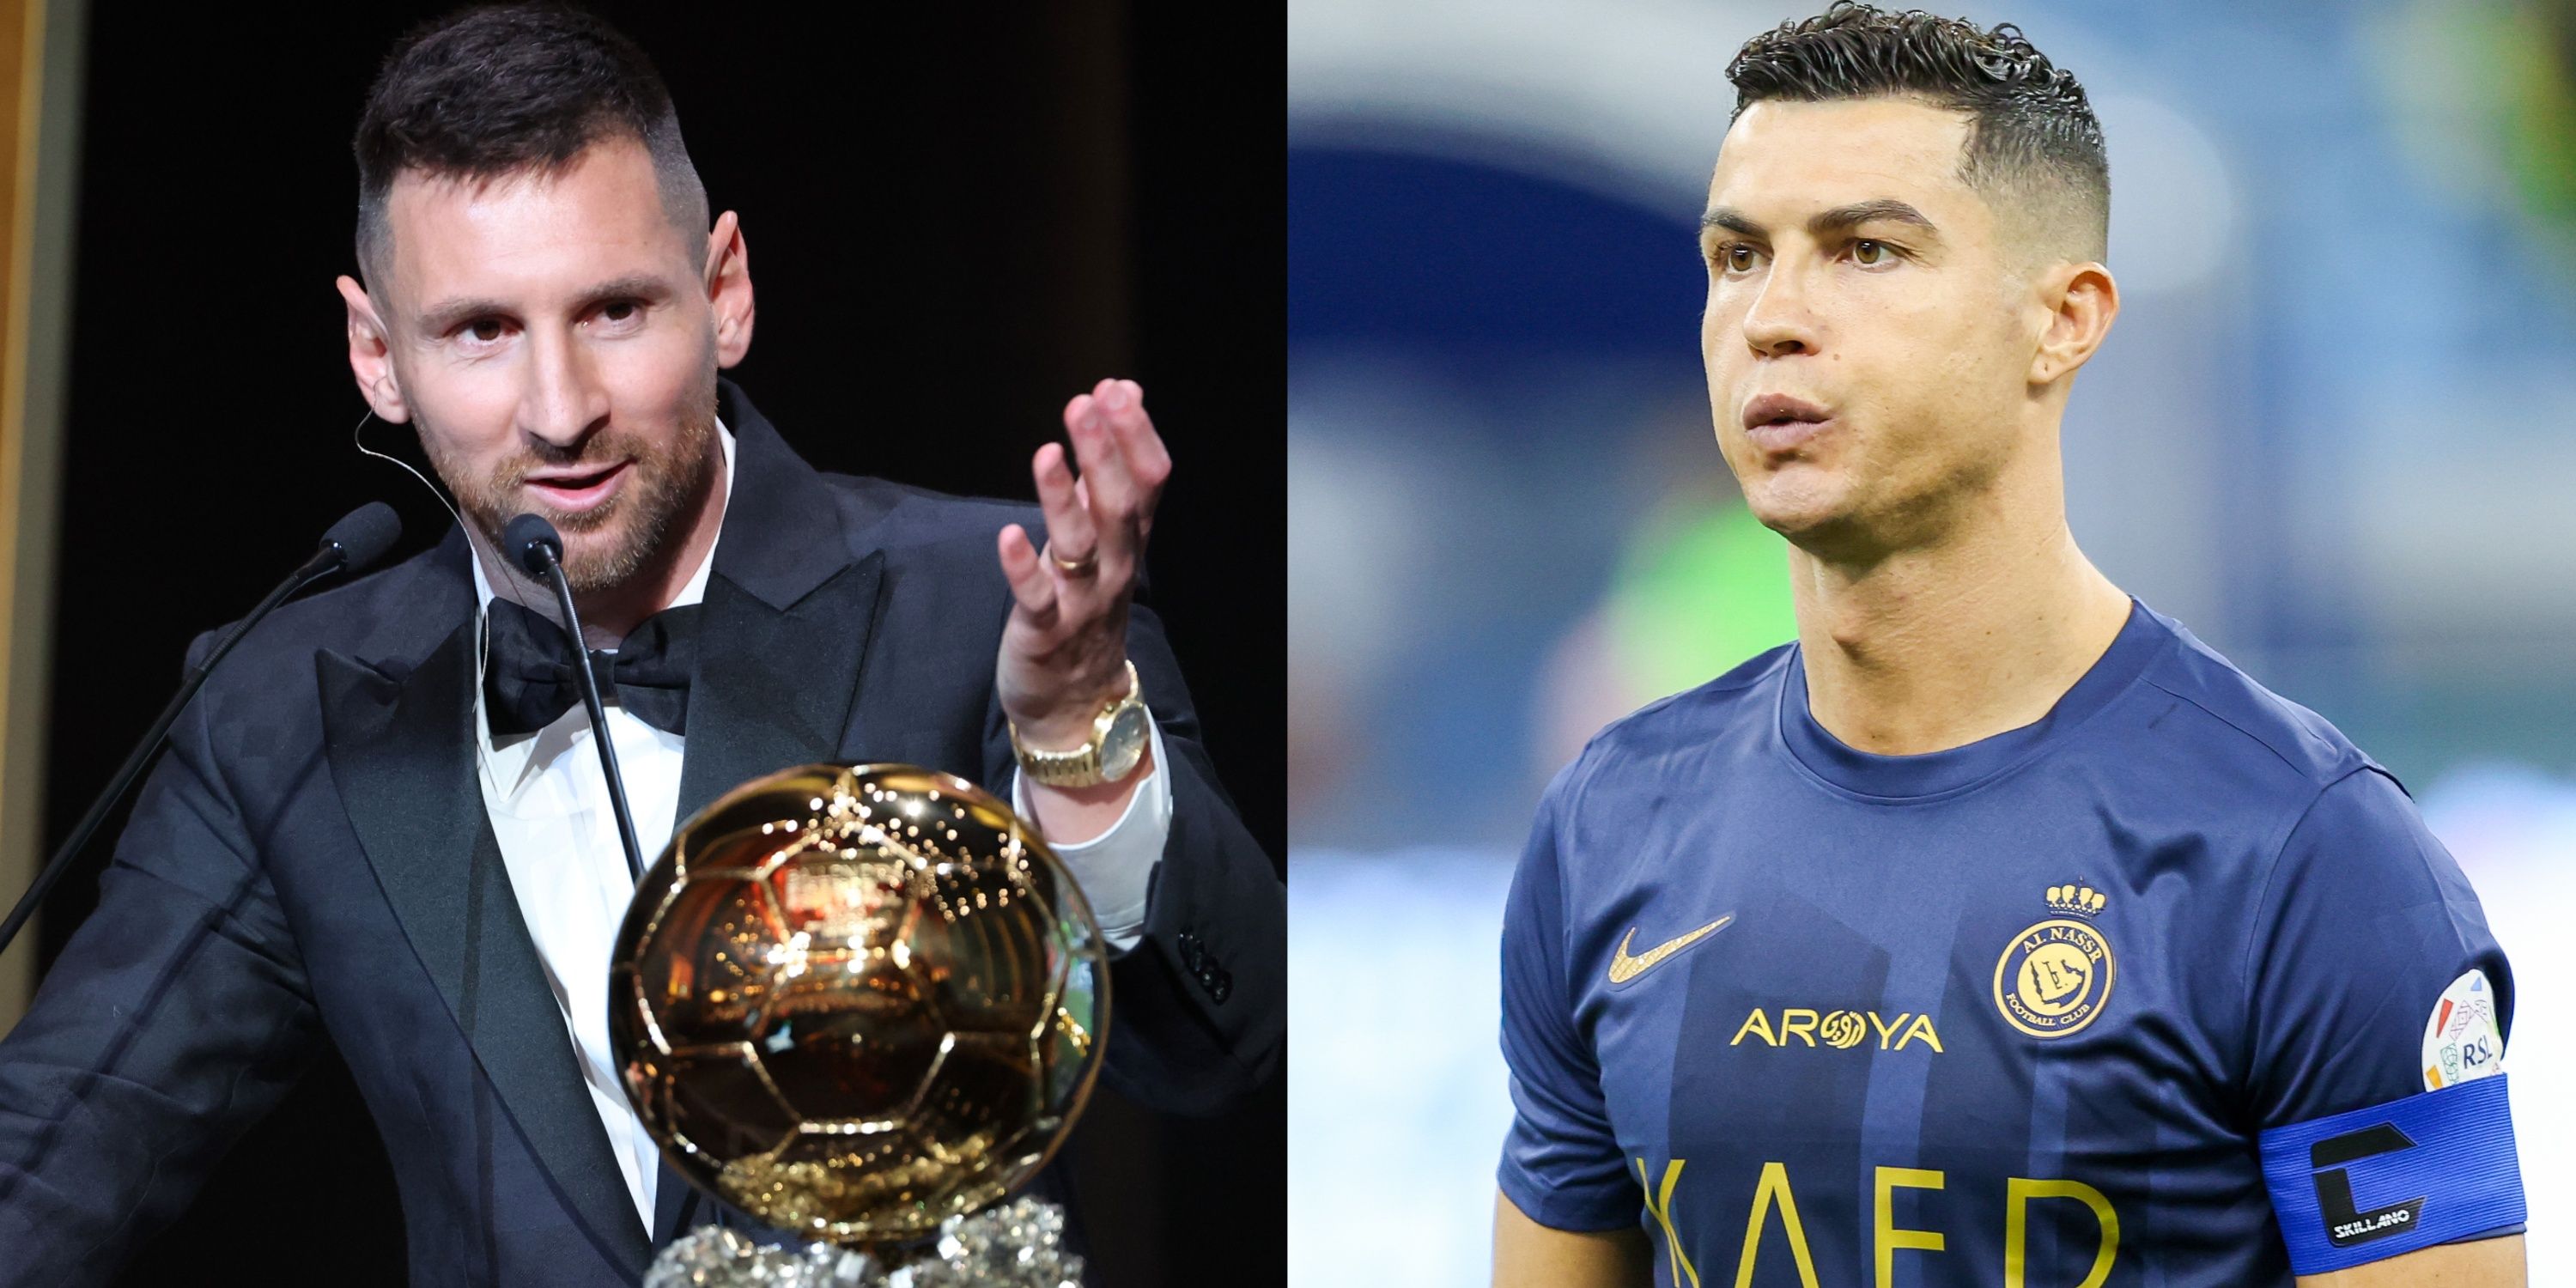 Cristiano Ronaldo’s Instagram comment after Messi’s eighth Ballon d’Or win causes a stir